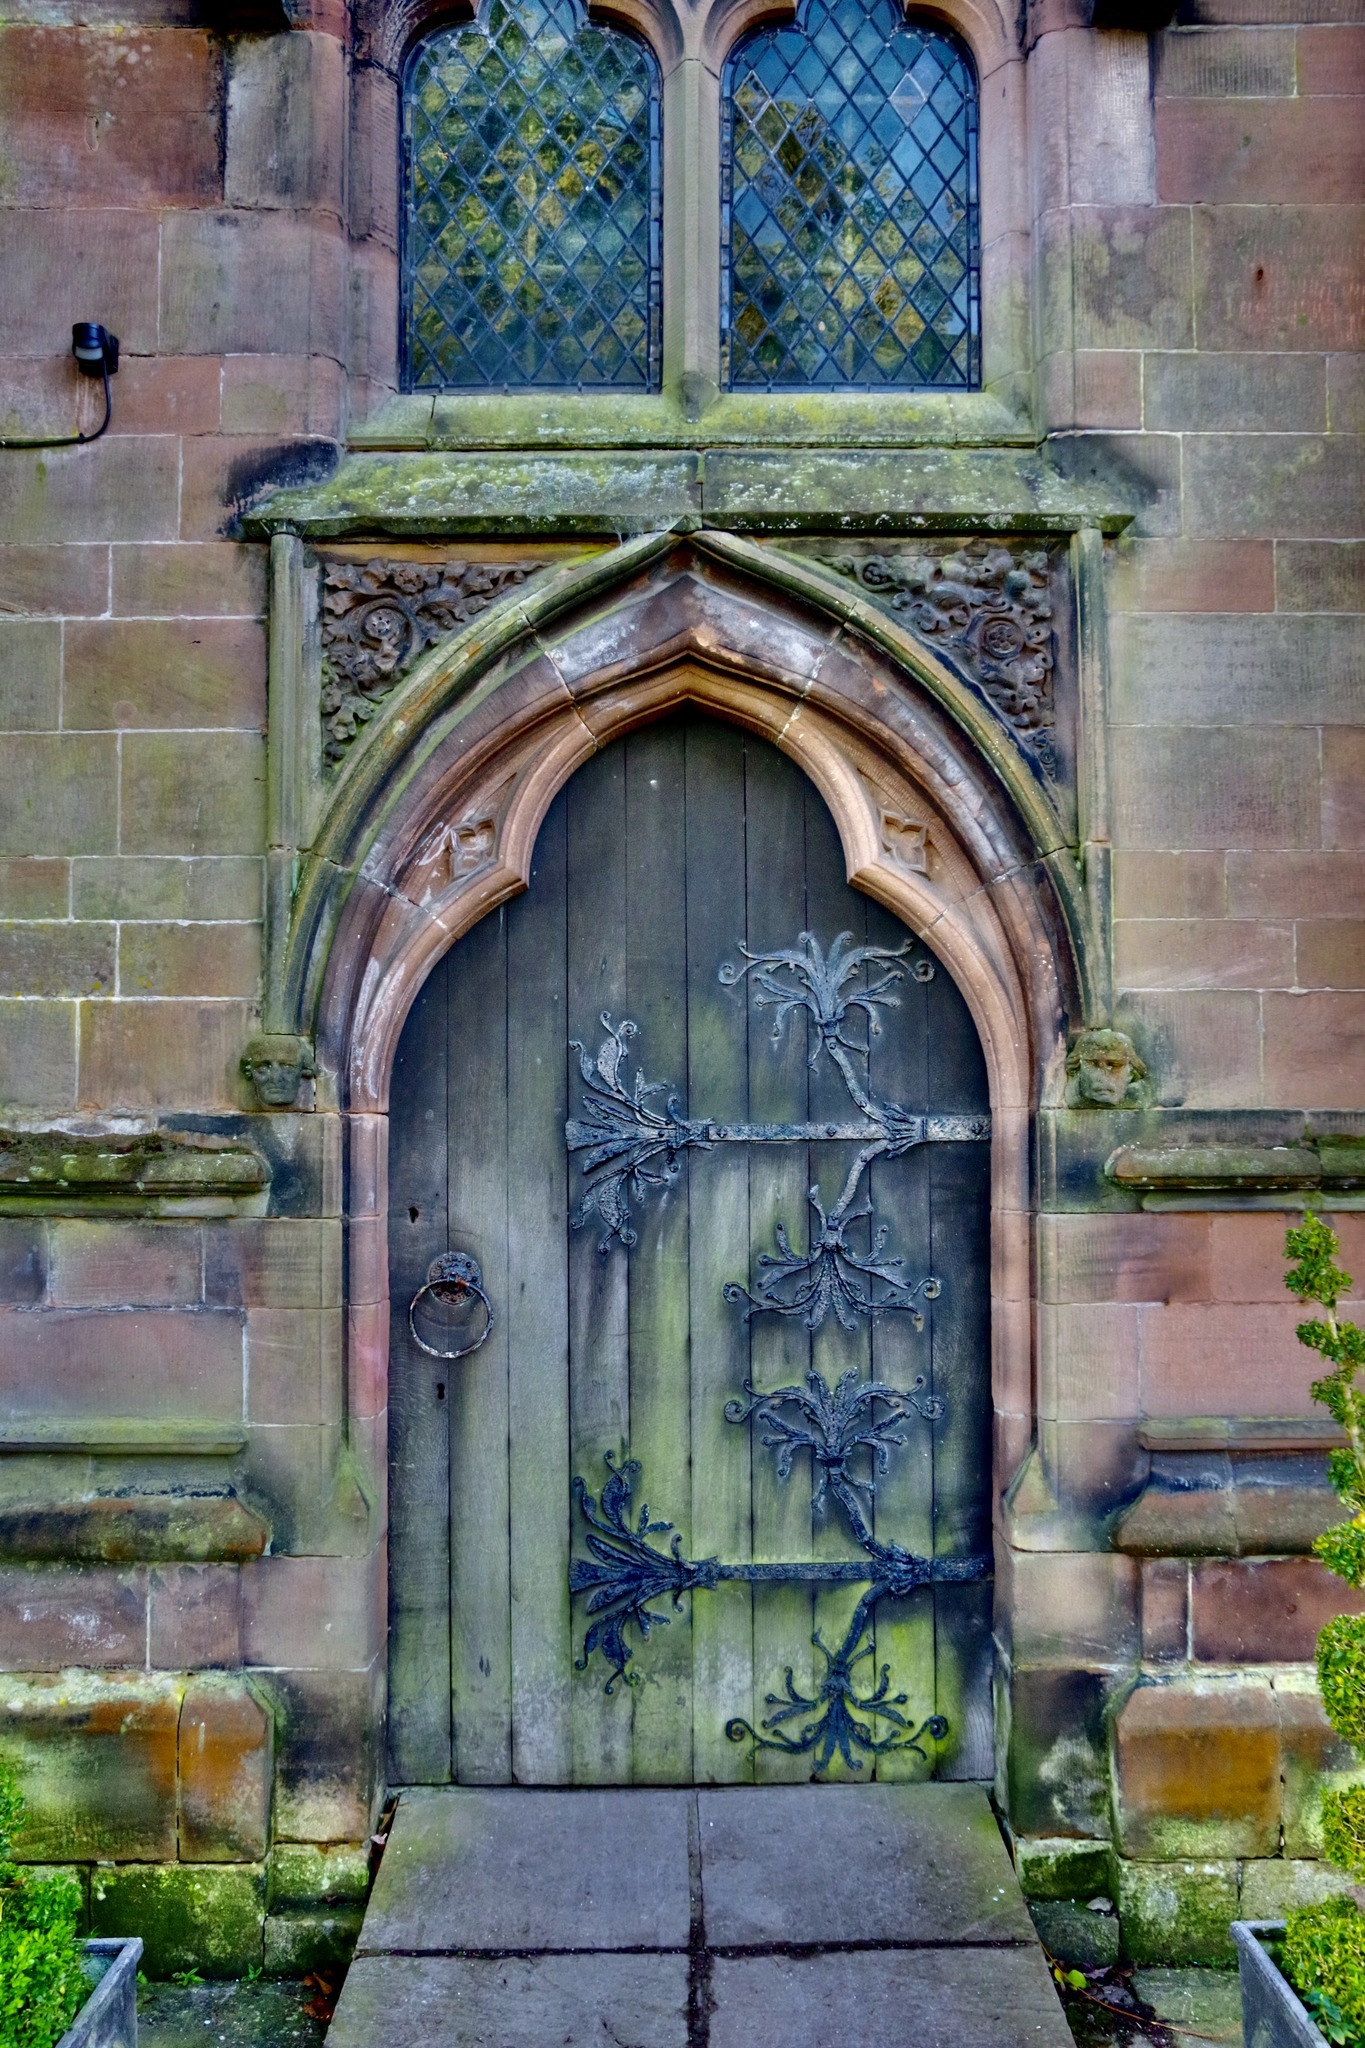 Chapel doorway at Arley Hall by terry Gregory